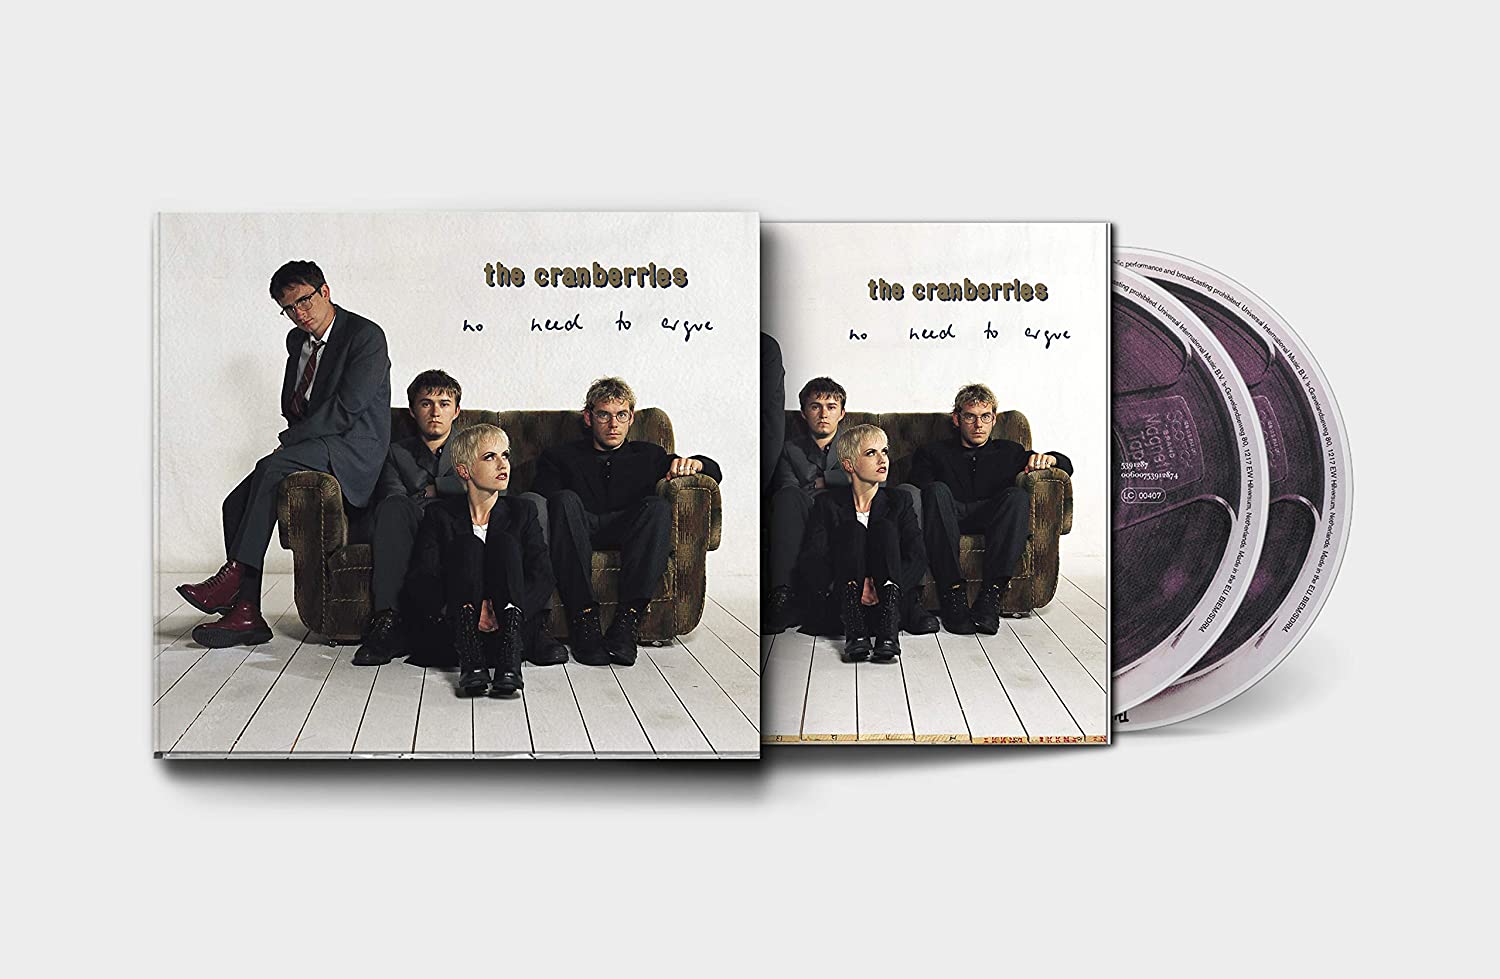 The Cranberries / No Need To Argue remastered and expanded